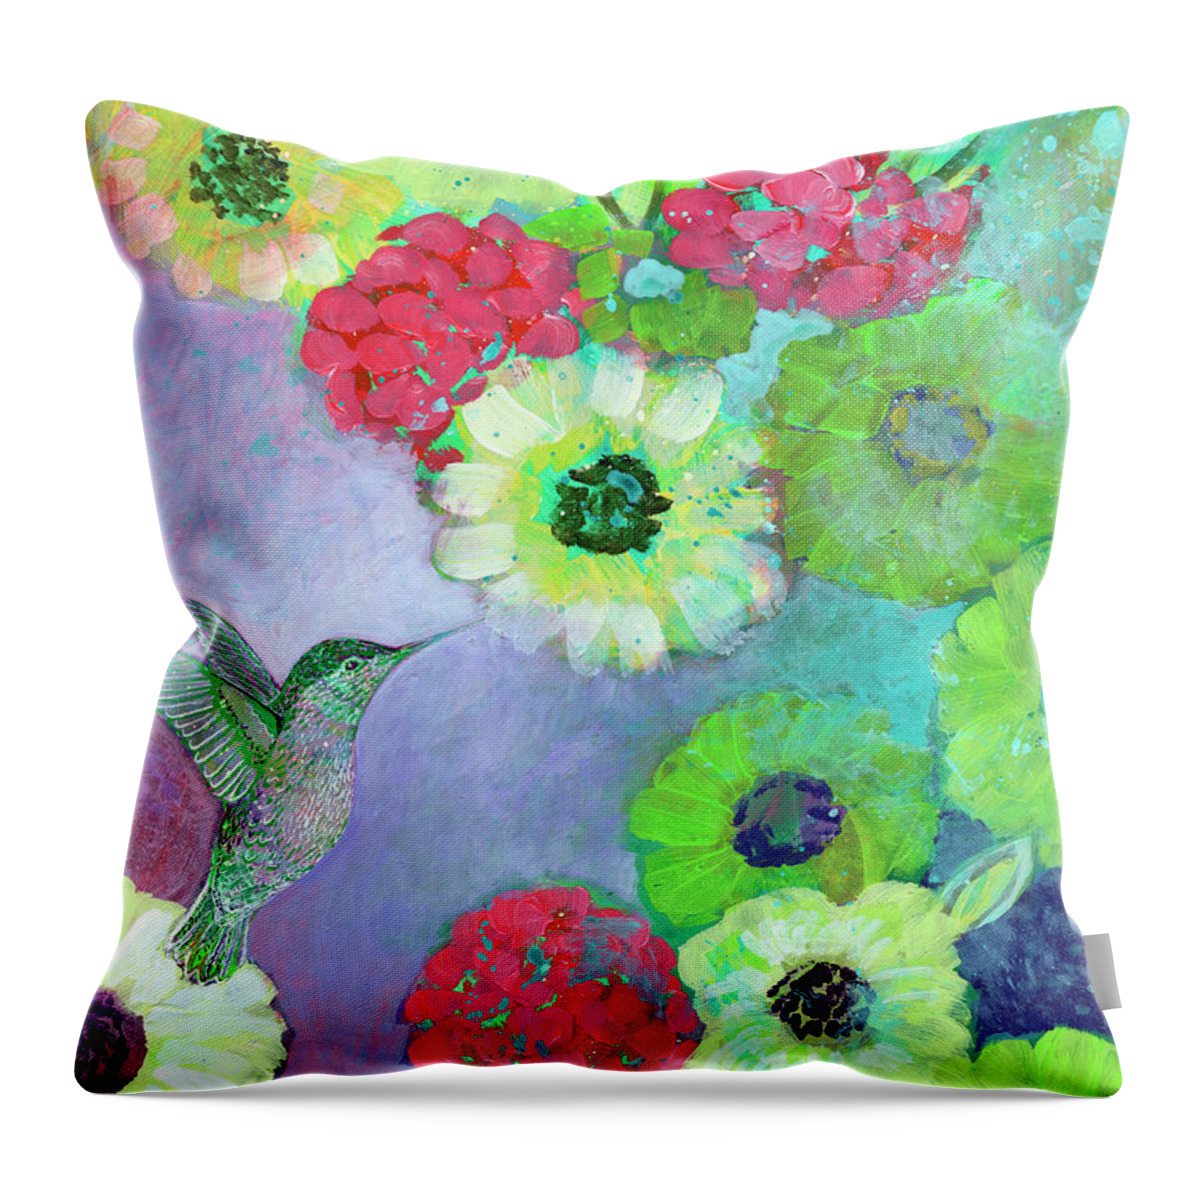 Hummingbird Throw Pillow featuring the painting I Am the Morning Dew by Jennifer Lommers